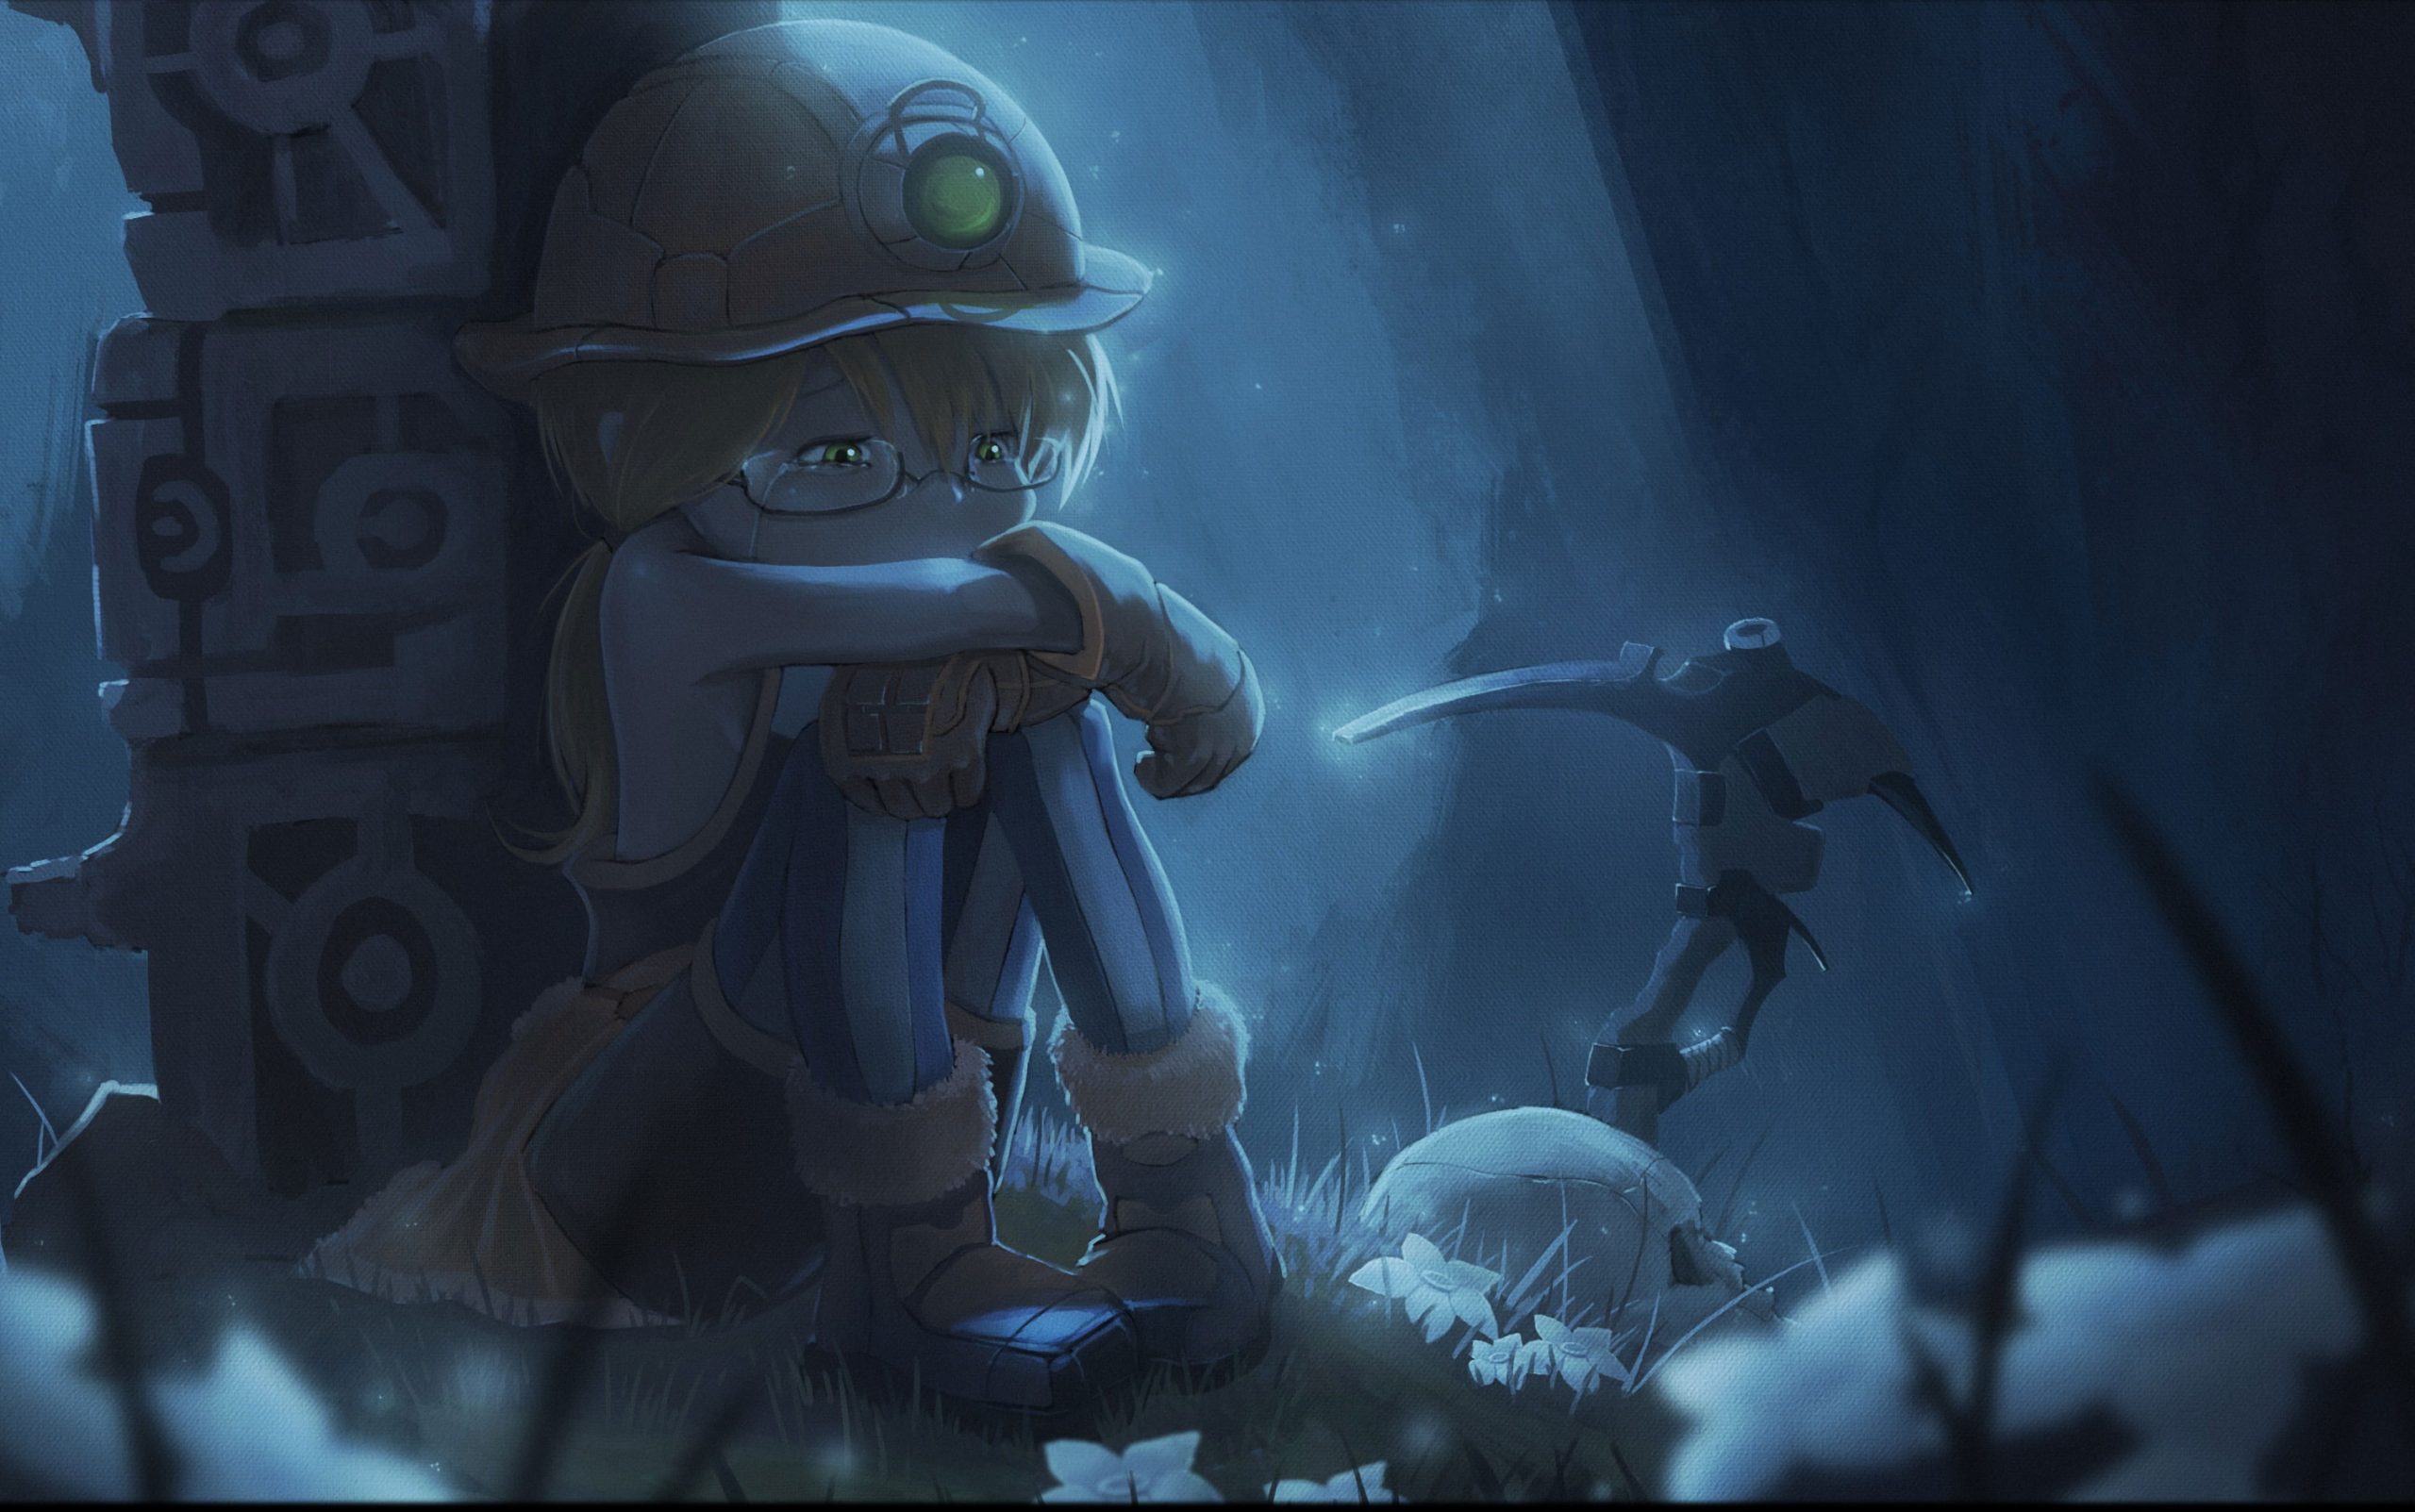 Wallpaper Riko Made In Abyss, Pickaxes, Miner Workers, Made in Abyss, Anime